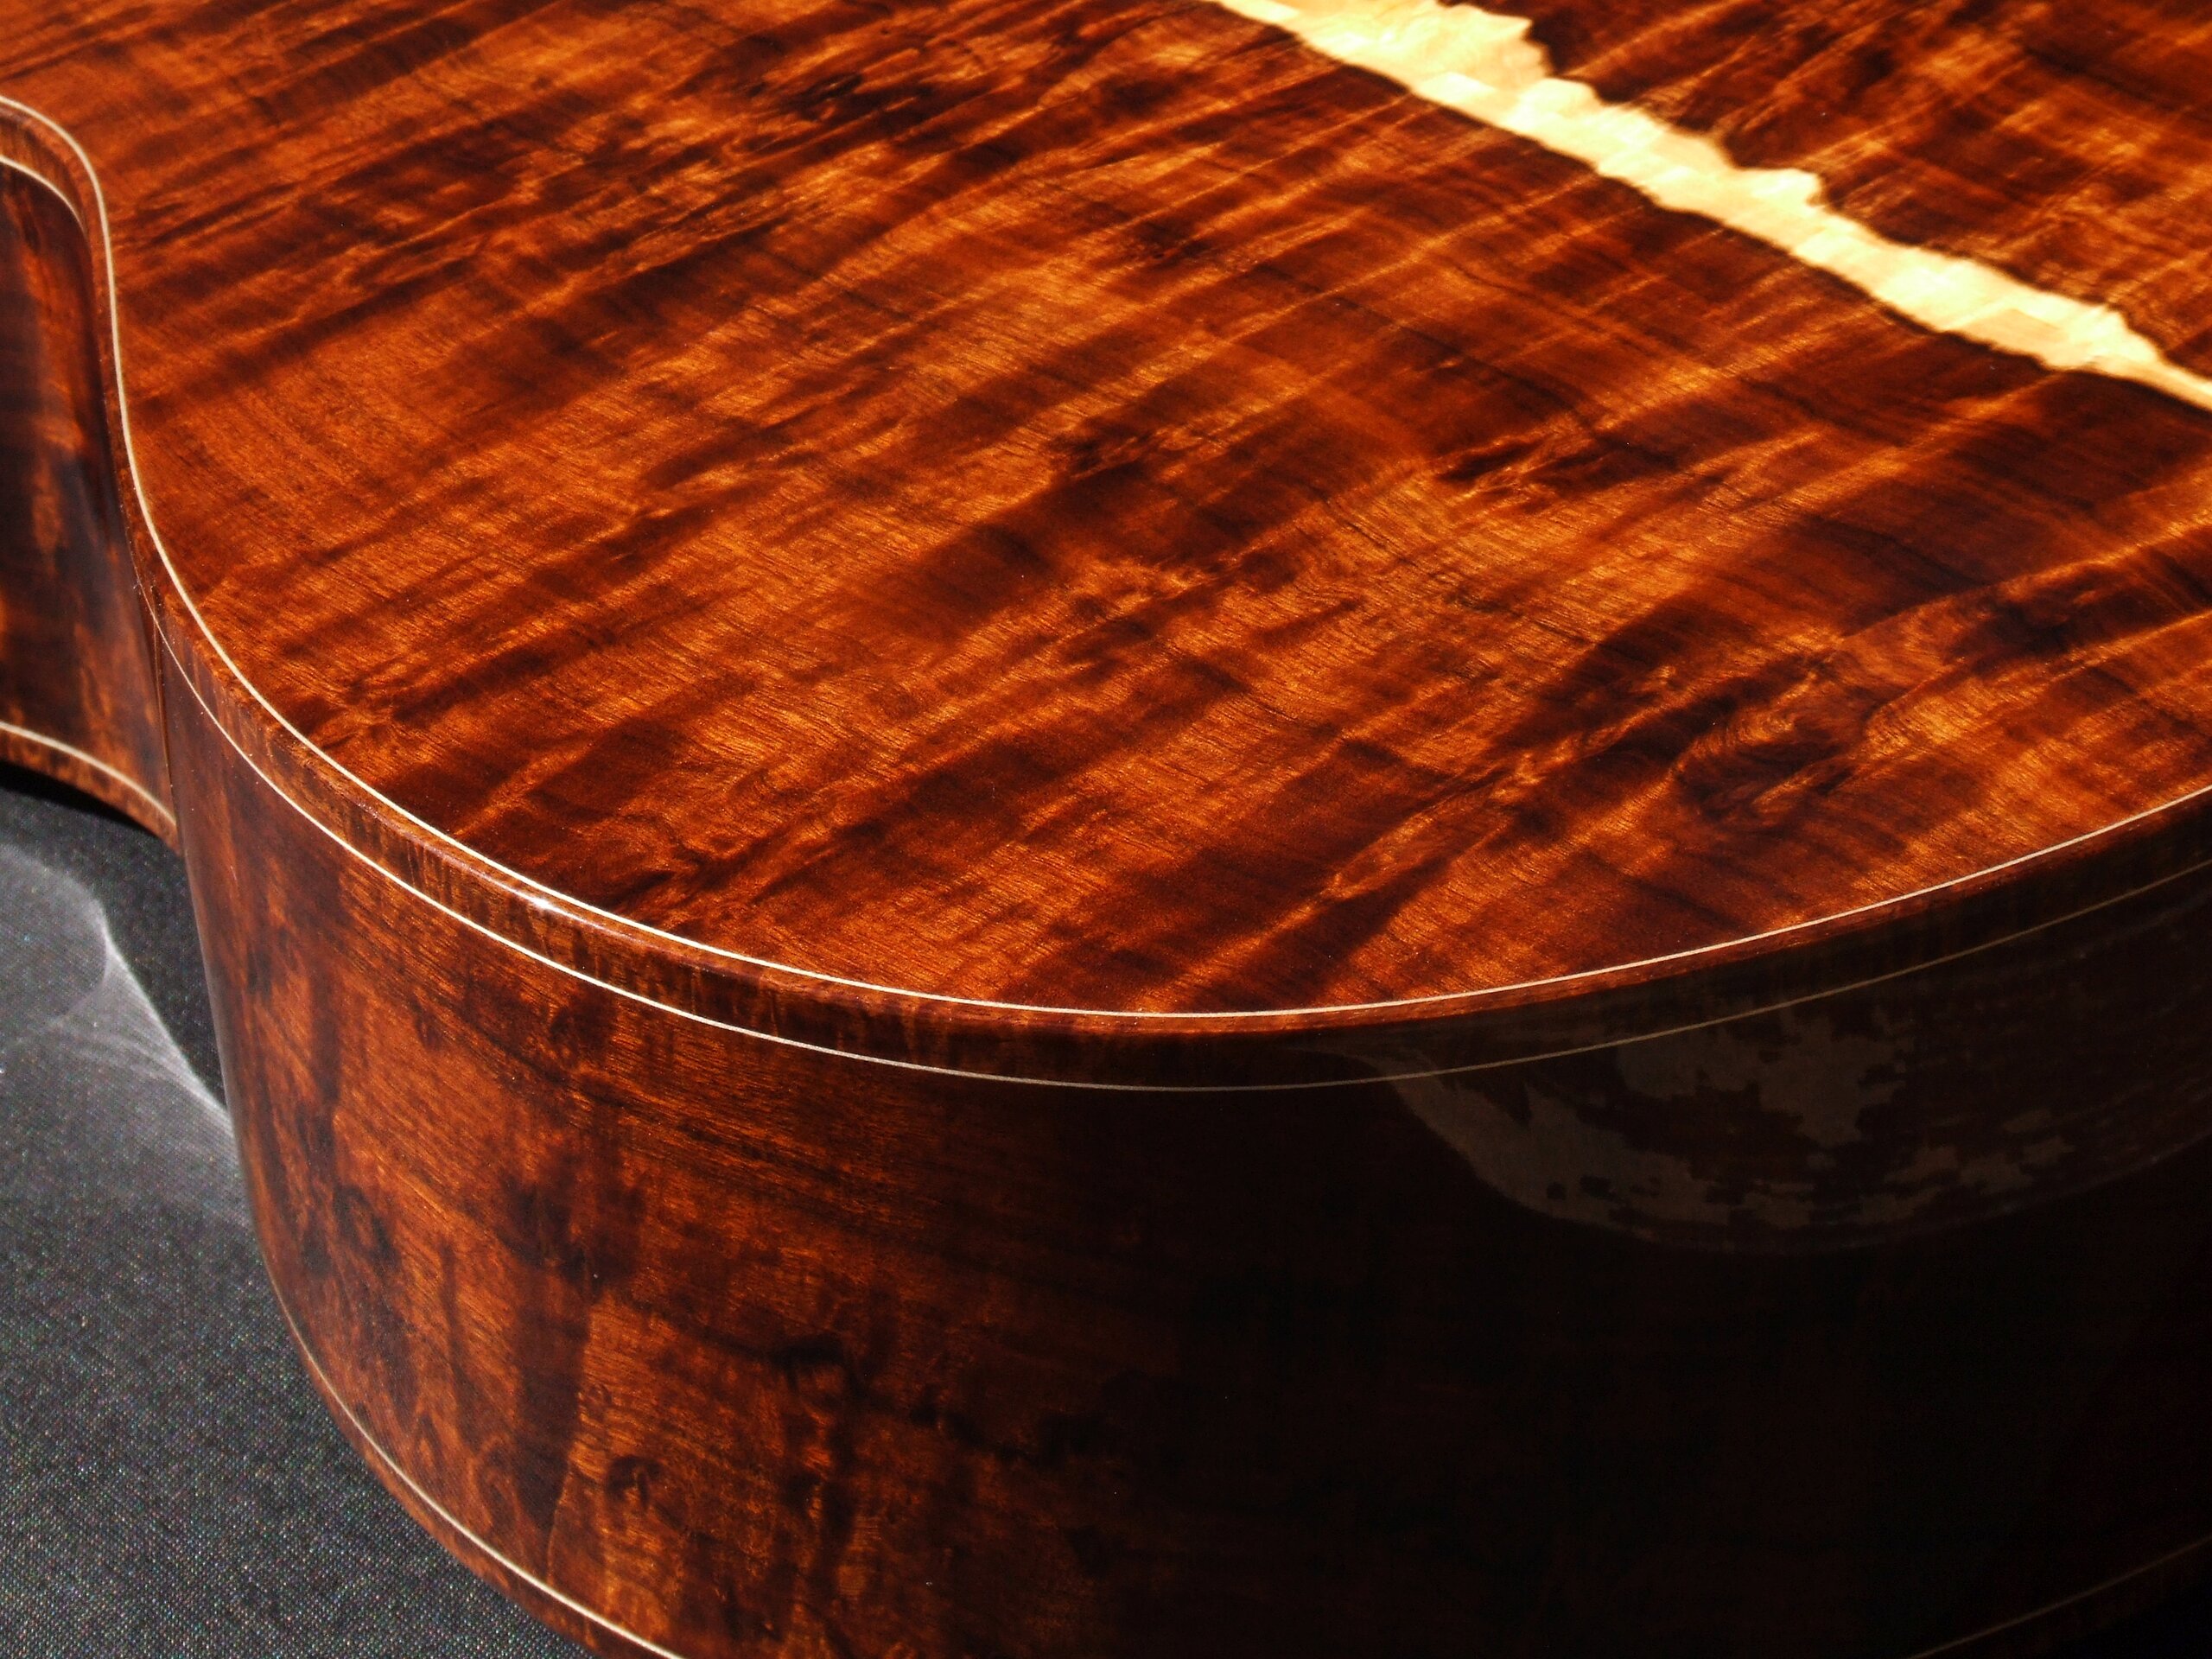 Custom guitars. Gore classical guitar with highly figured Gidgee back and sides